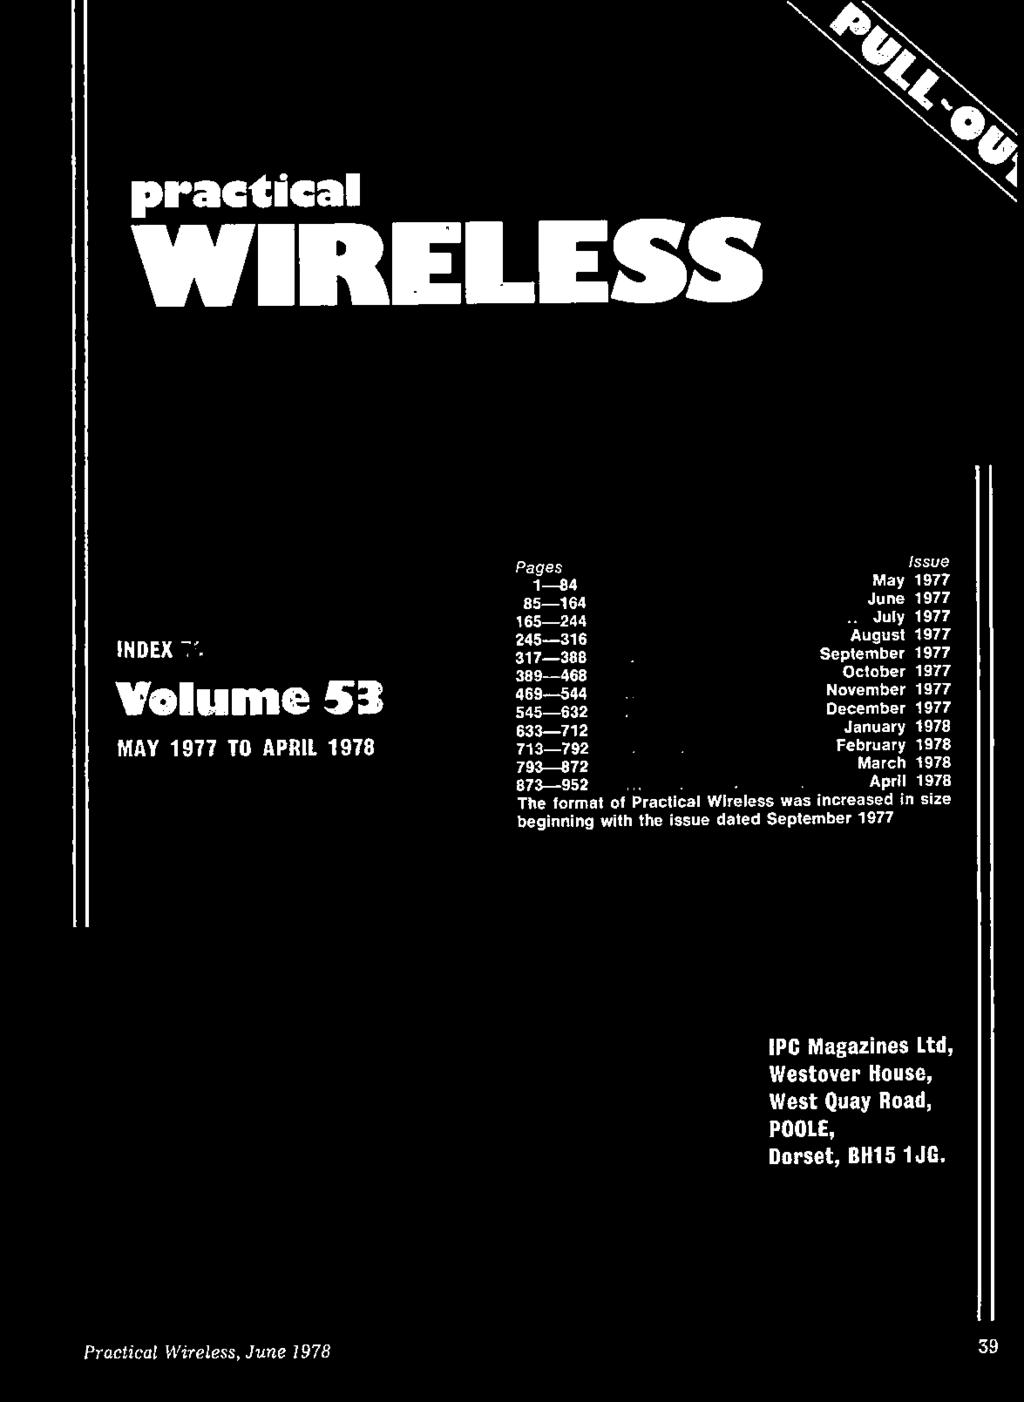 793 872 March 1978 873--952 873 952 April 1978 The format of Practical Wireless was increased in size beginning